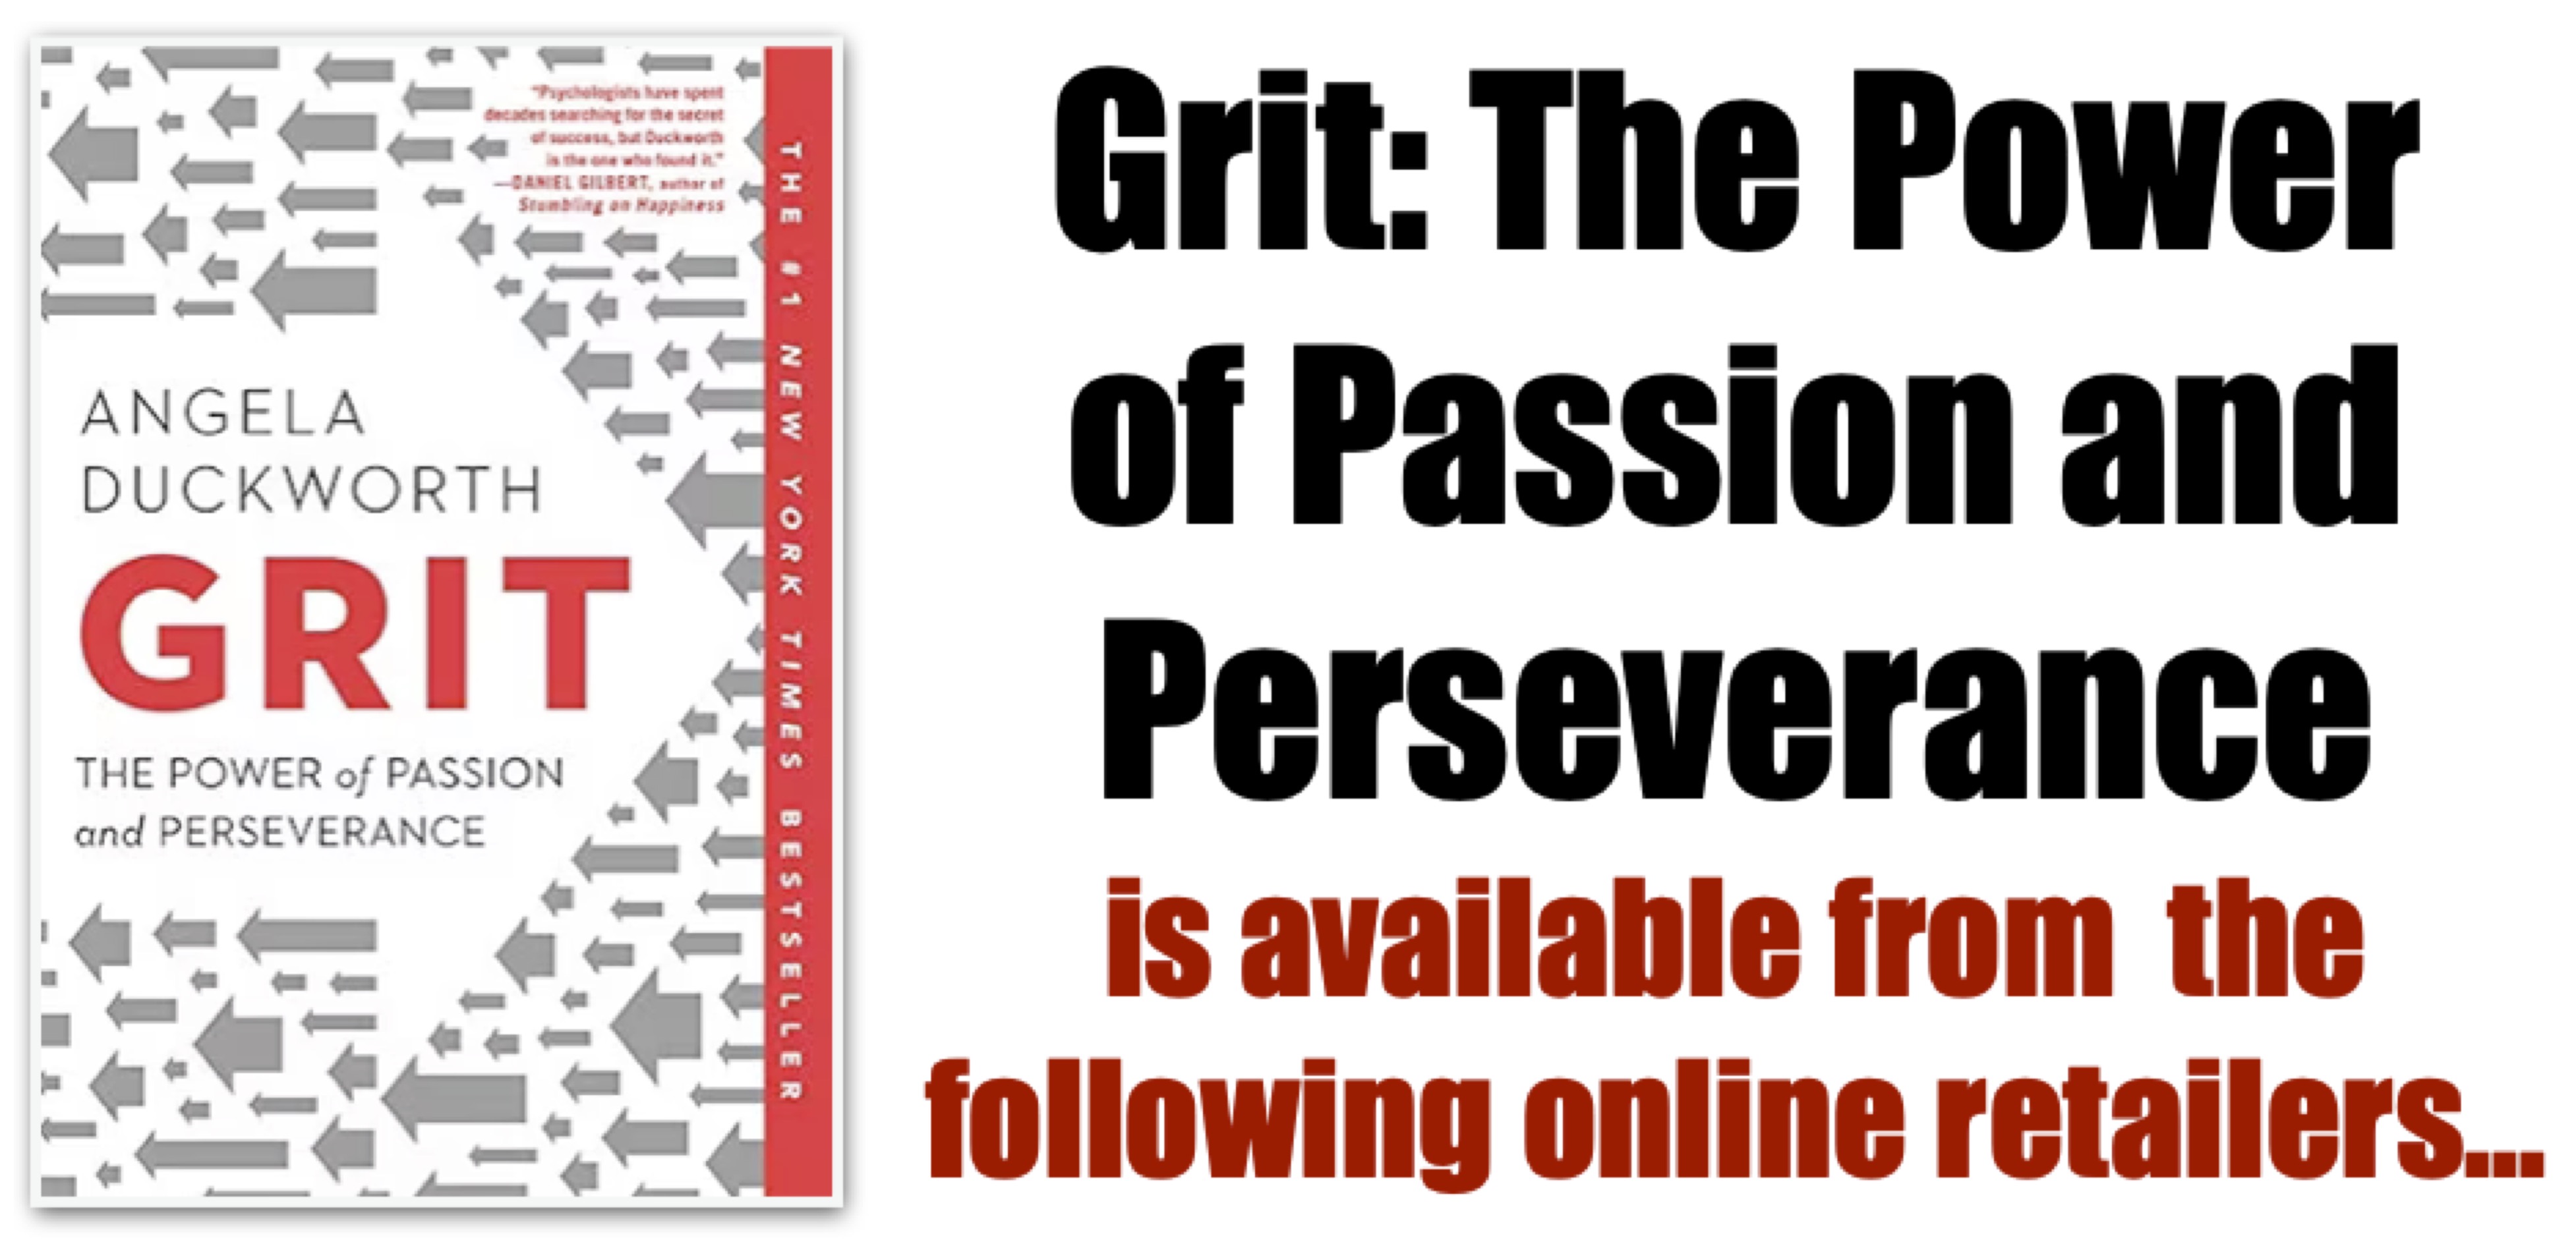 Grit is available from the following online retailers